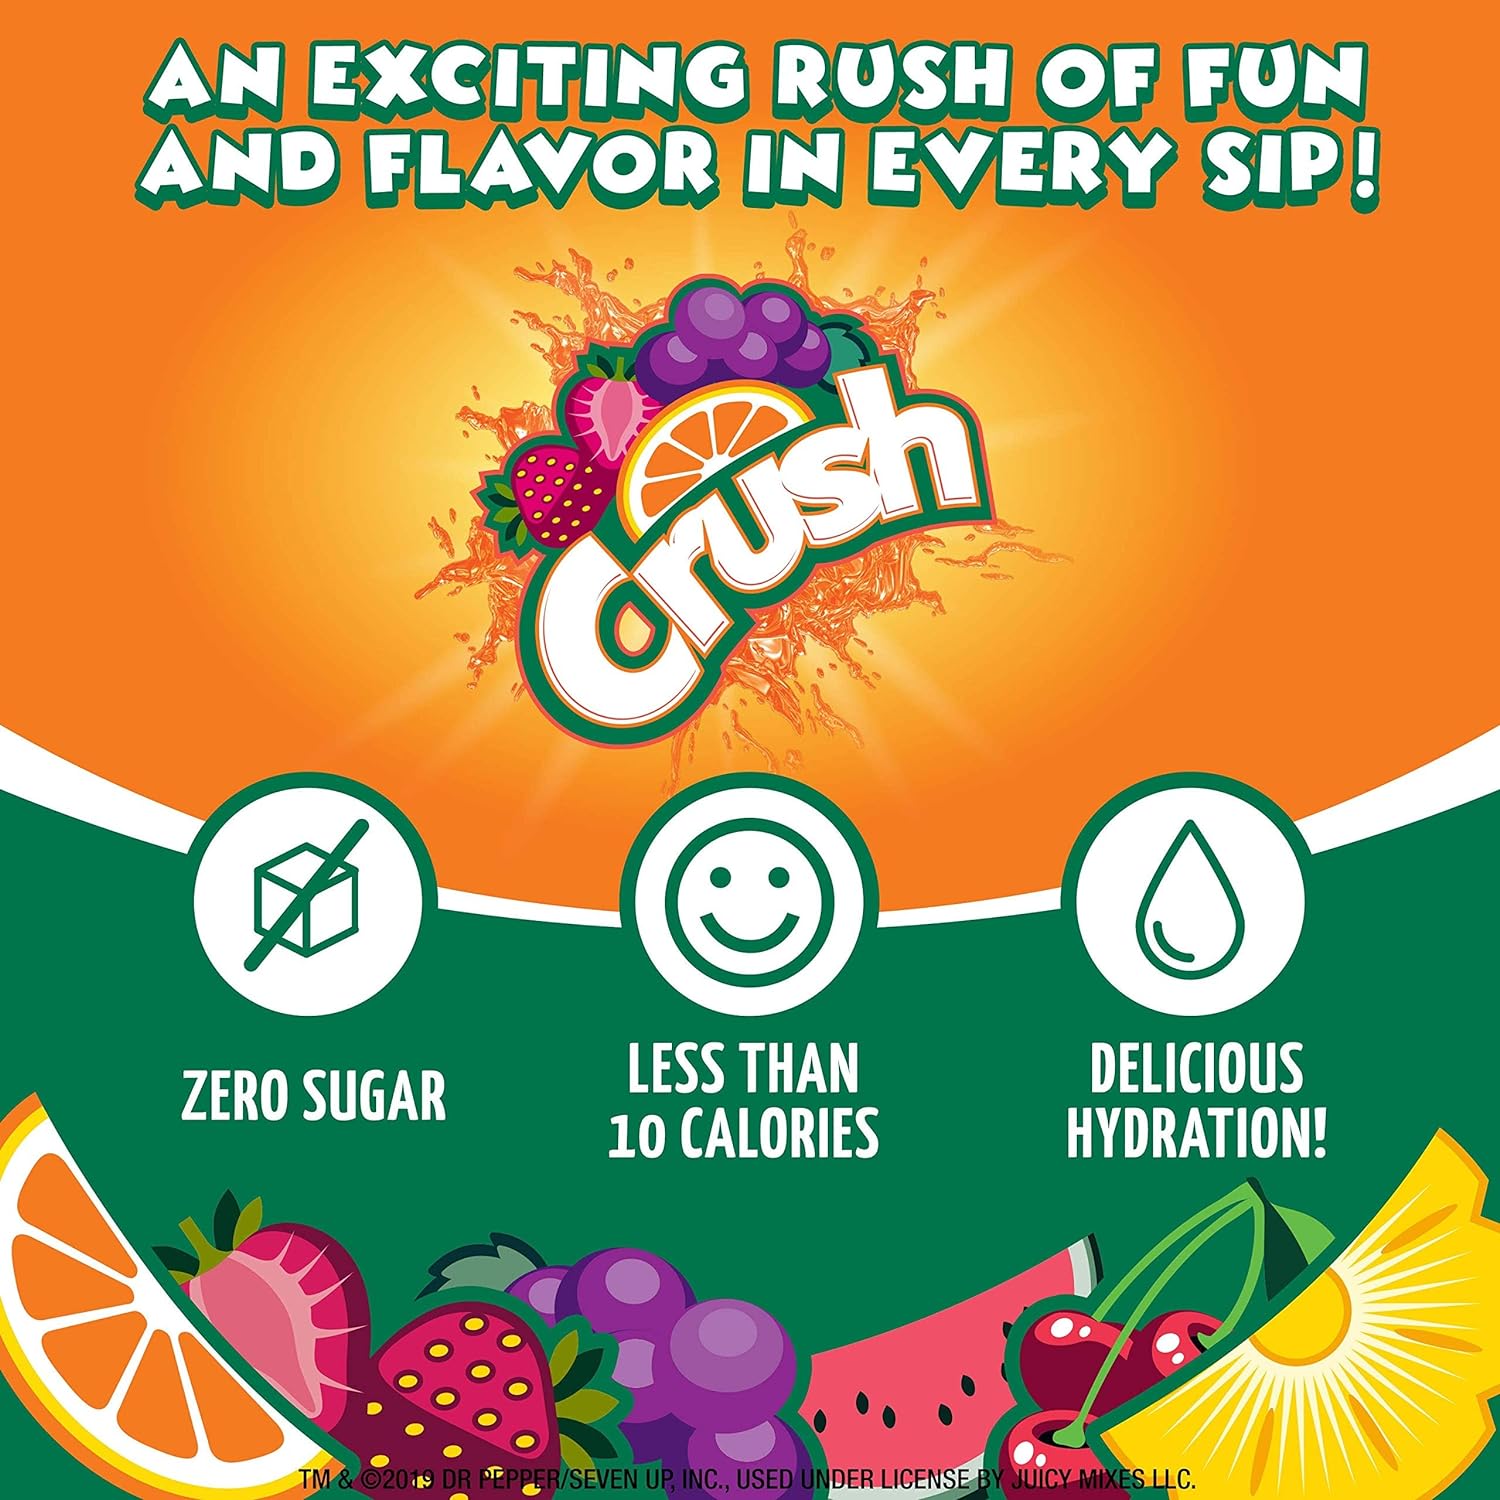 Crush, Watermelon– Powder Drink Mix – Sugar Free & Delicious, Makes 72 flavored water beverages